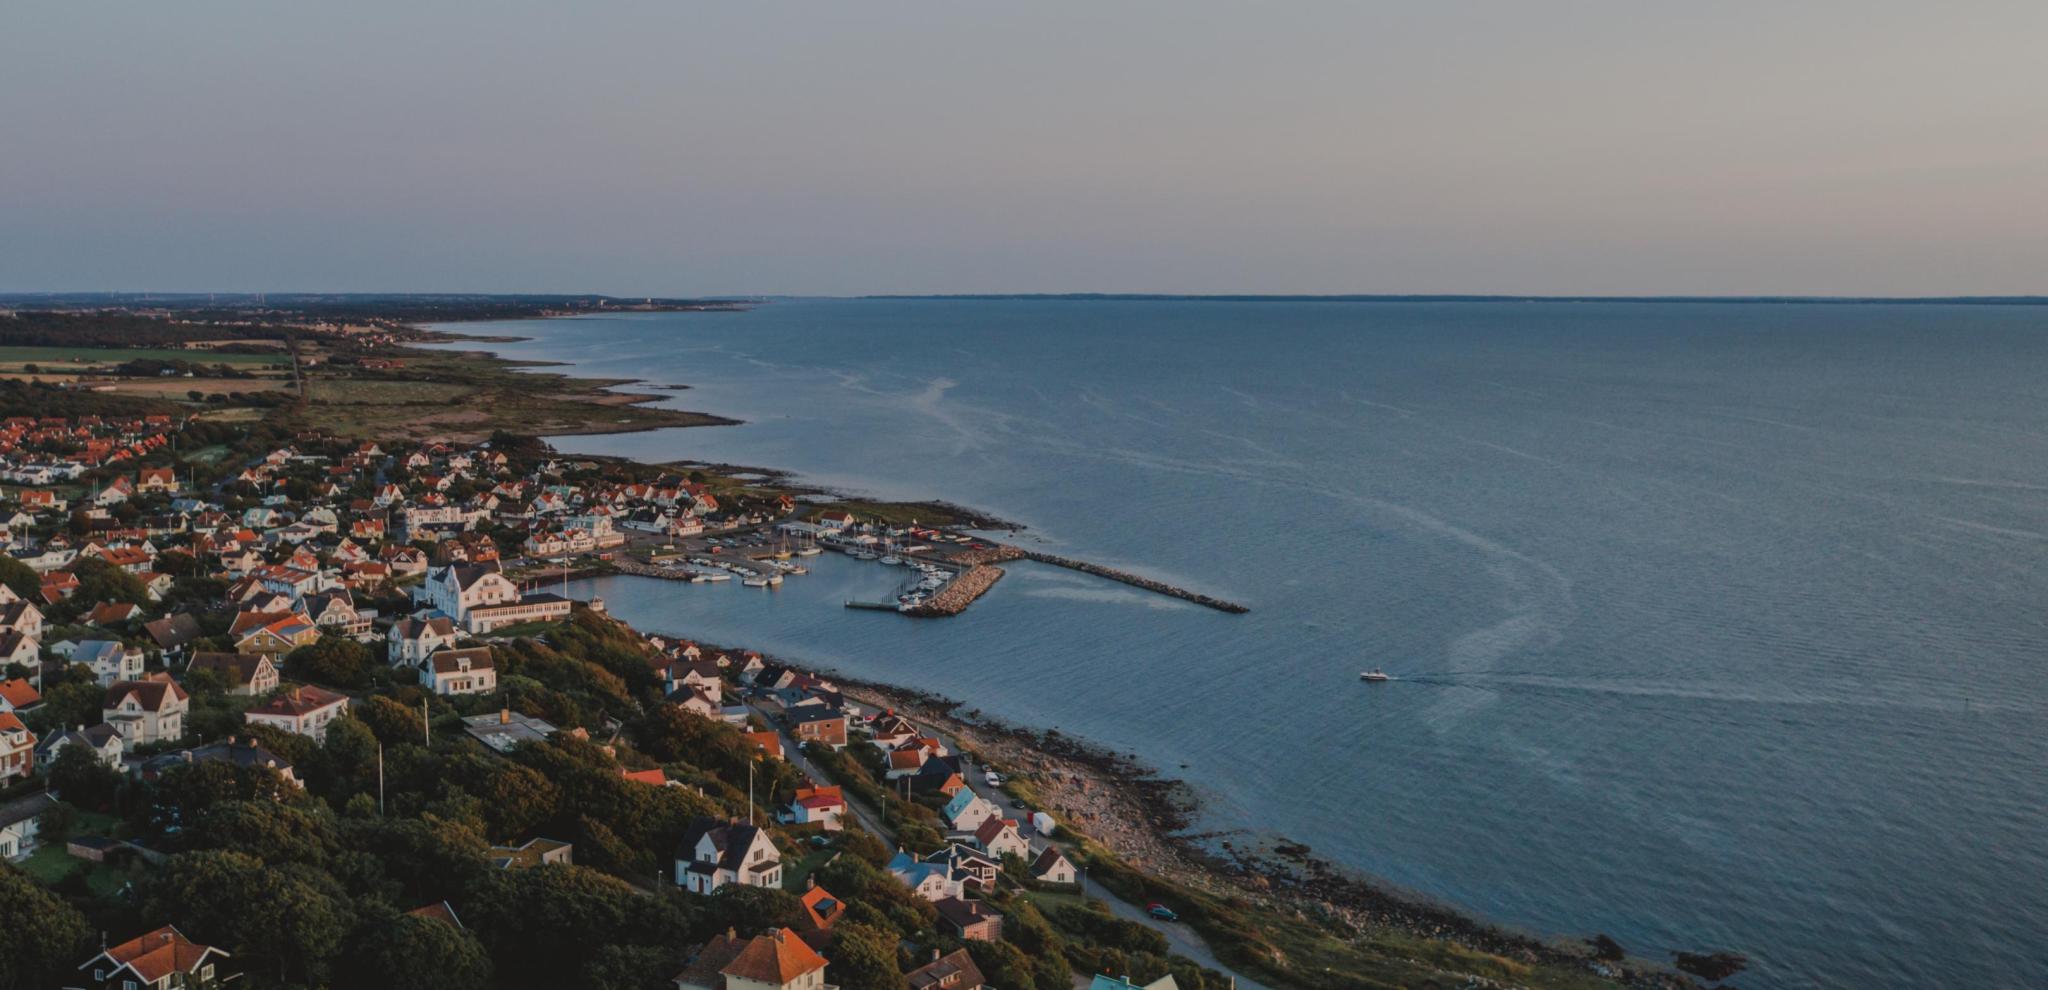 A view from above of the seaside town of Mölle